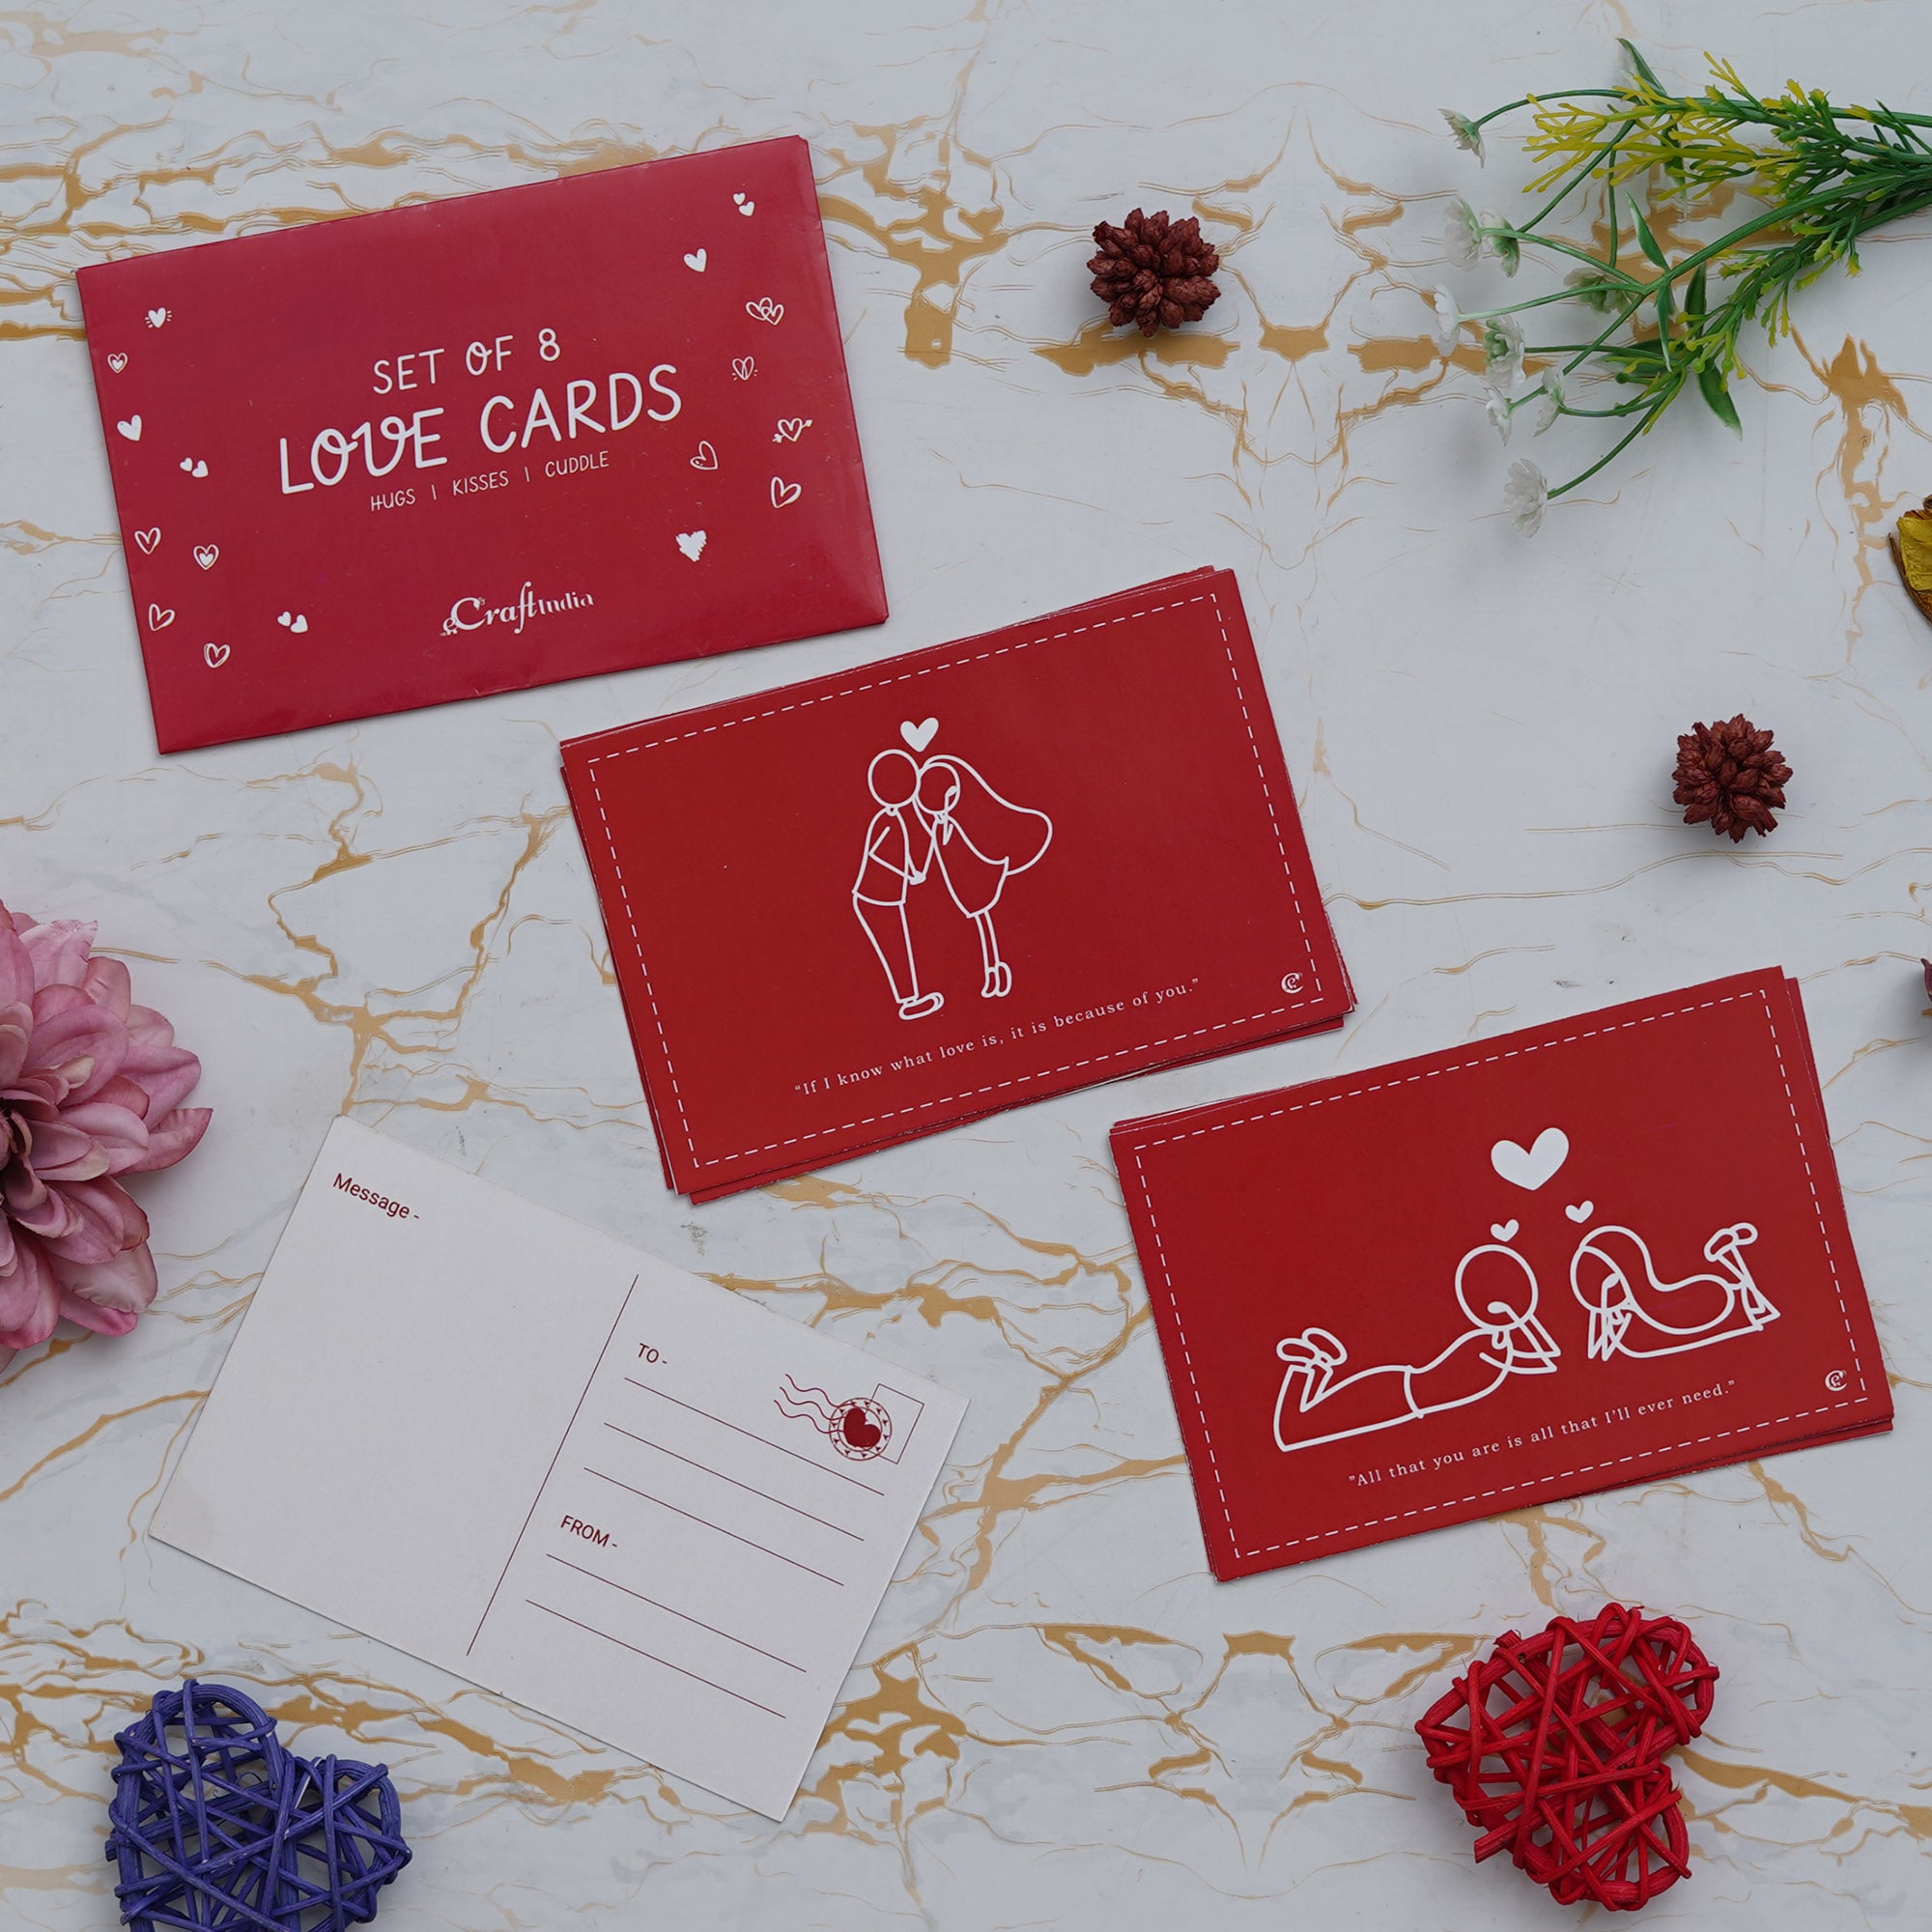 Valentine Combo of Pack of 8 Love Gift Cards, "20 Reasons Why I Need You" Printed on Little Hearts Wooden Gift Set, Red Roses Bouquet and White, Red Teddy Bear Valentine's Rectangle Shaped Gift Box 1